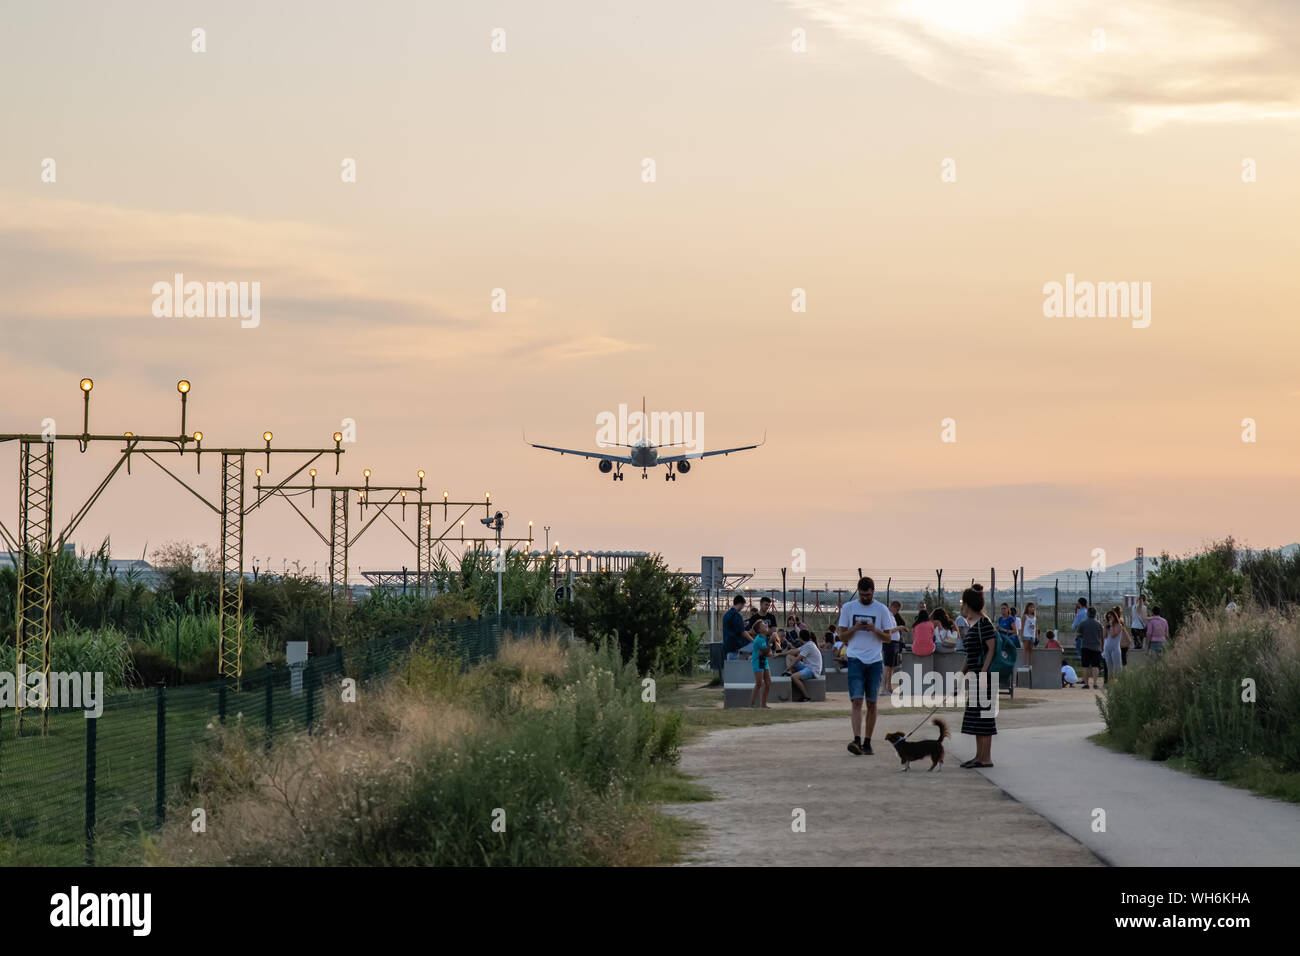 Aircraft landing in El Prat Barcelona airport overflying a group of people Stock Photo